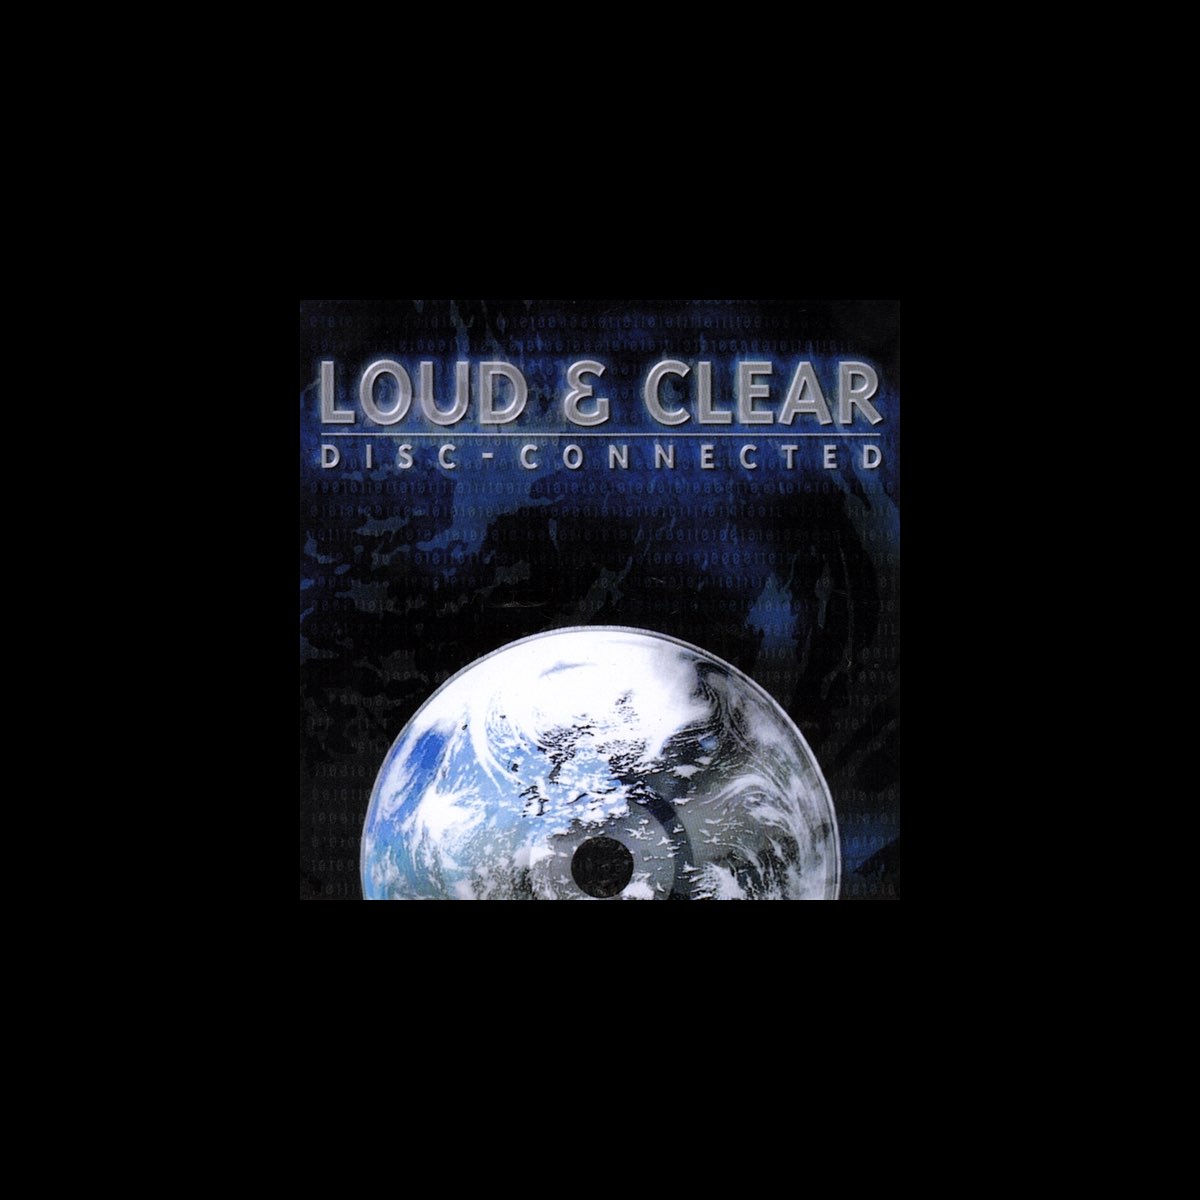 Loud and clear. 5:5 Loud and Clear.